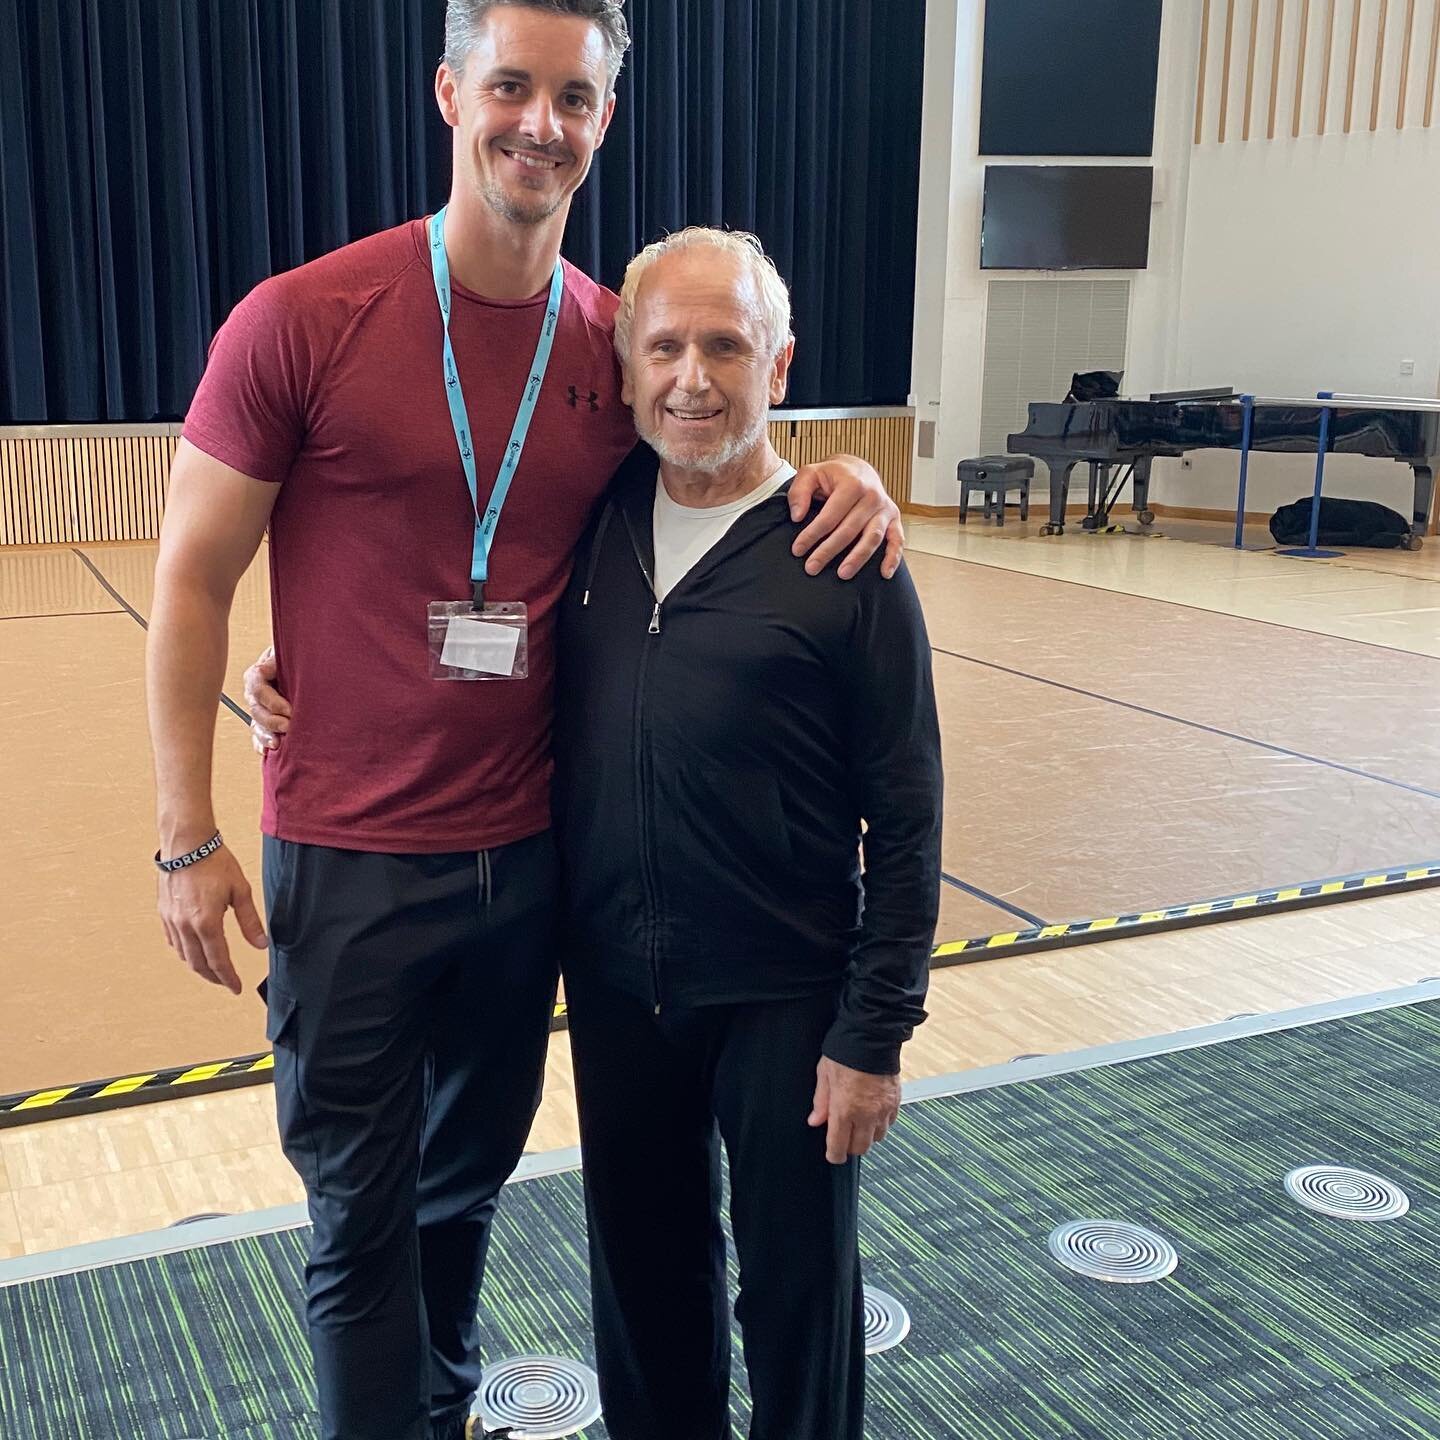 Many thanks to Iain Mackay for inviting me to Harrogate, to give a Masterclass for the Yorkshire Ballet Seminars, a wonderful display of young talent. WS x